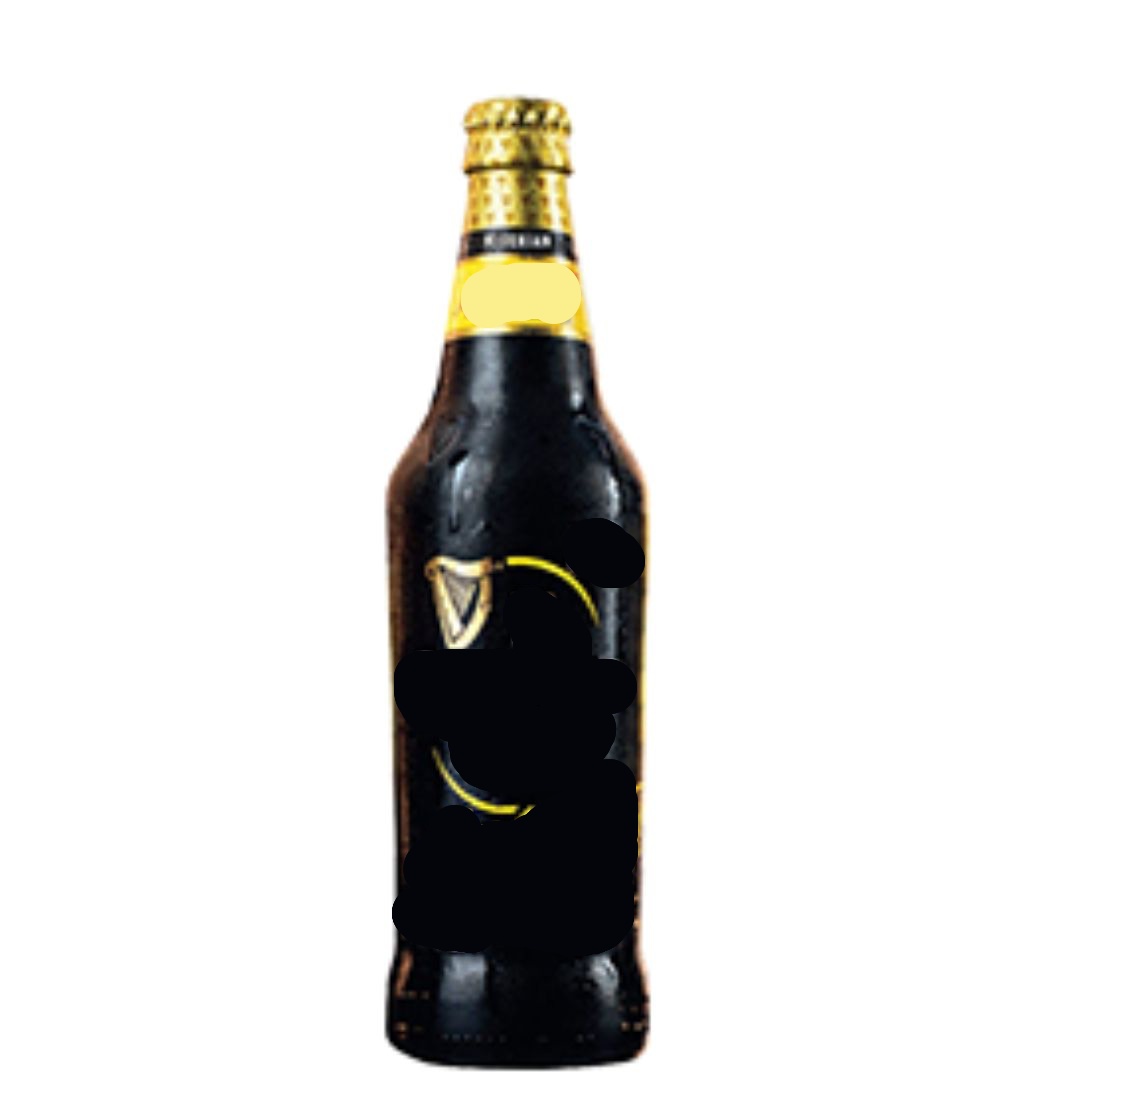 What beer brand is this?